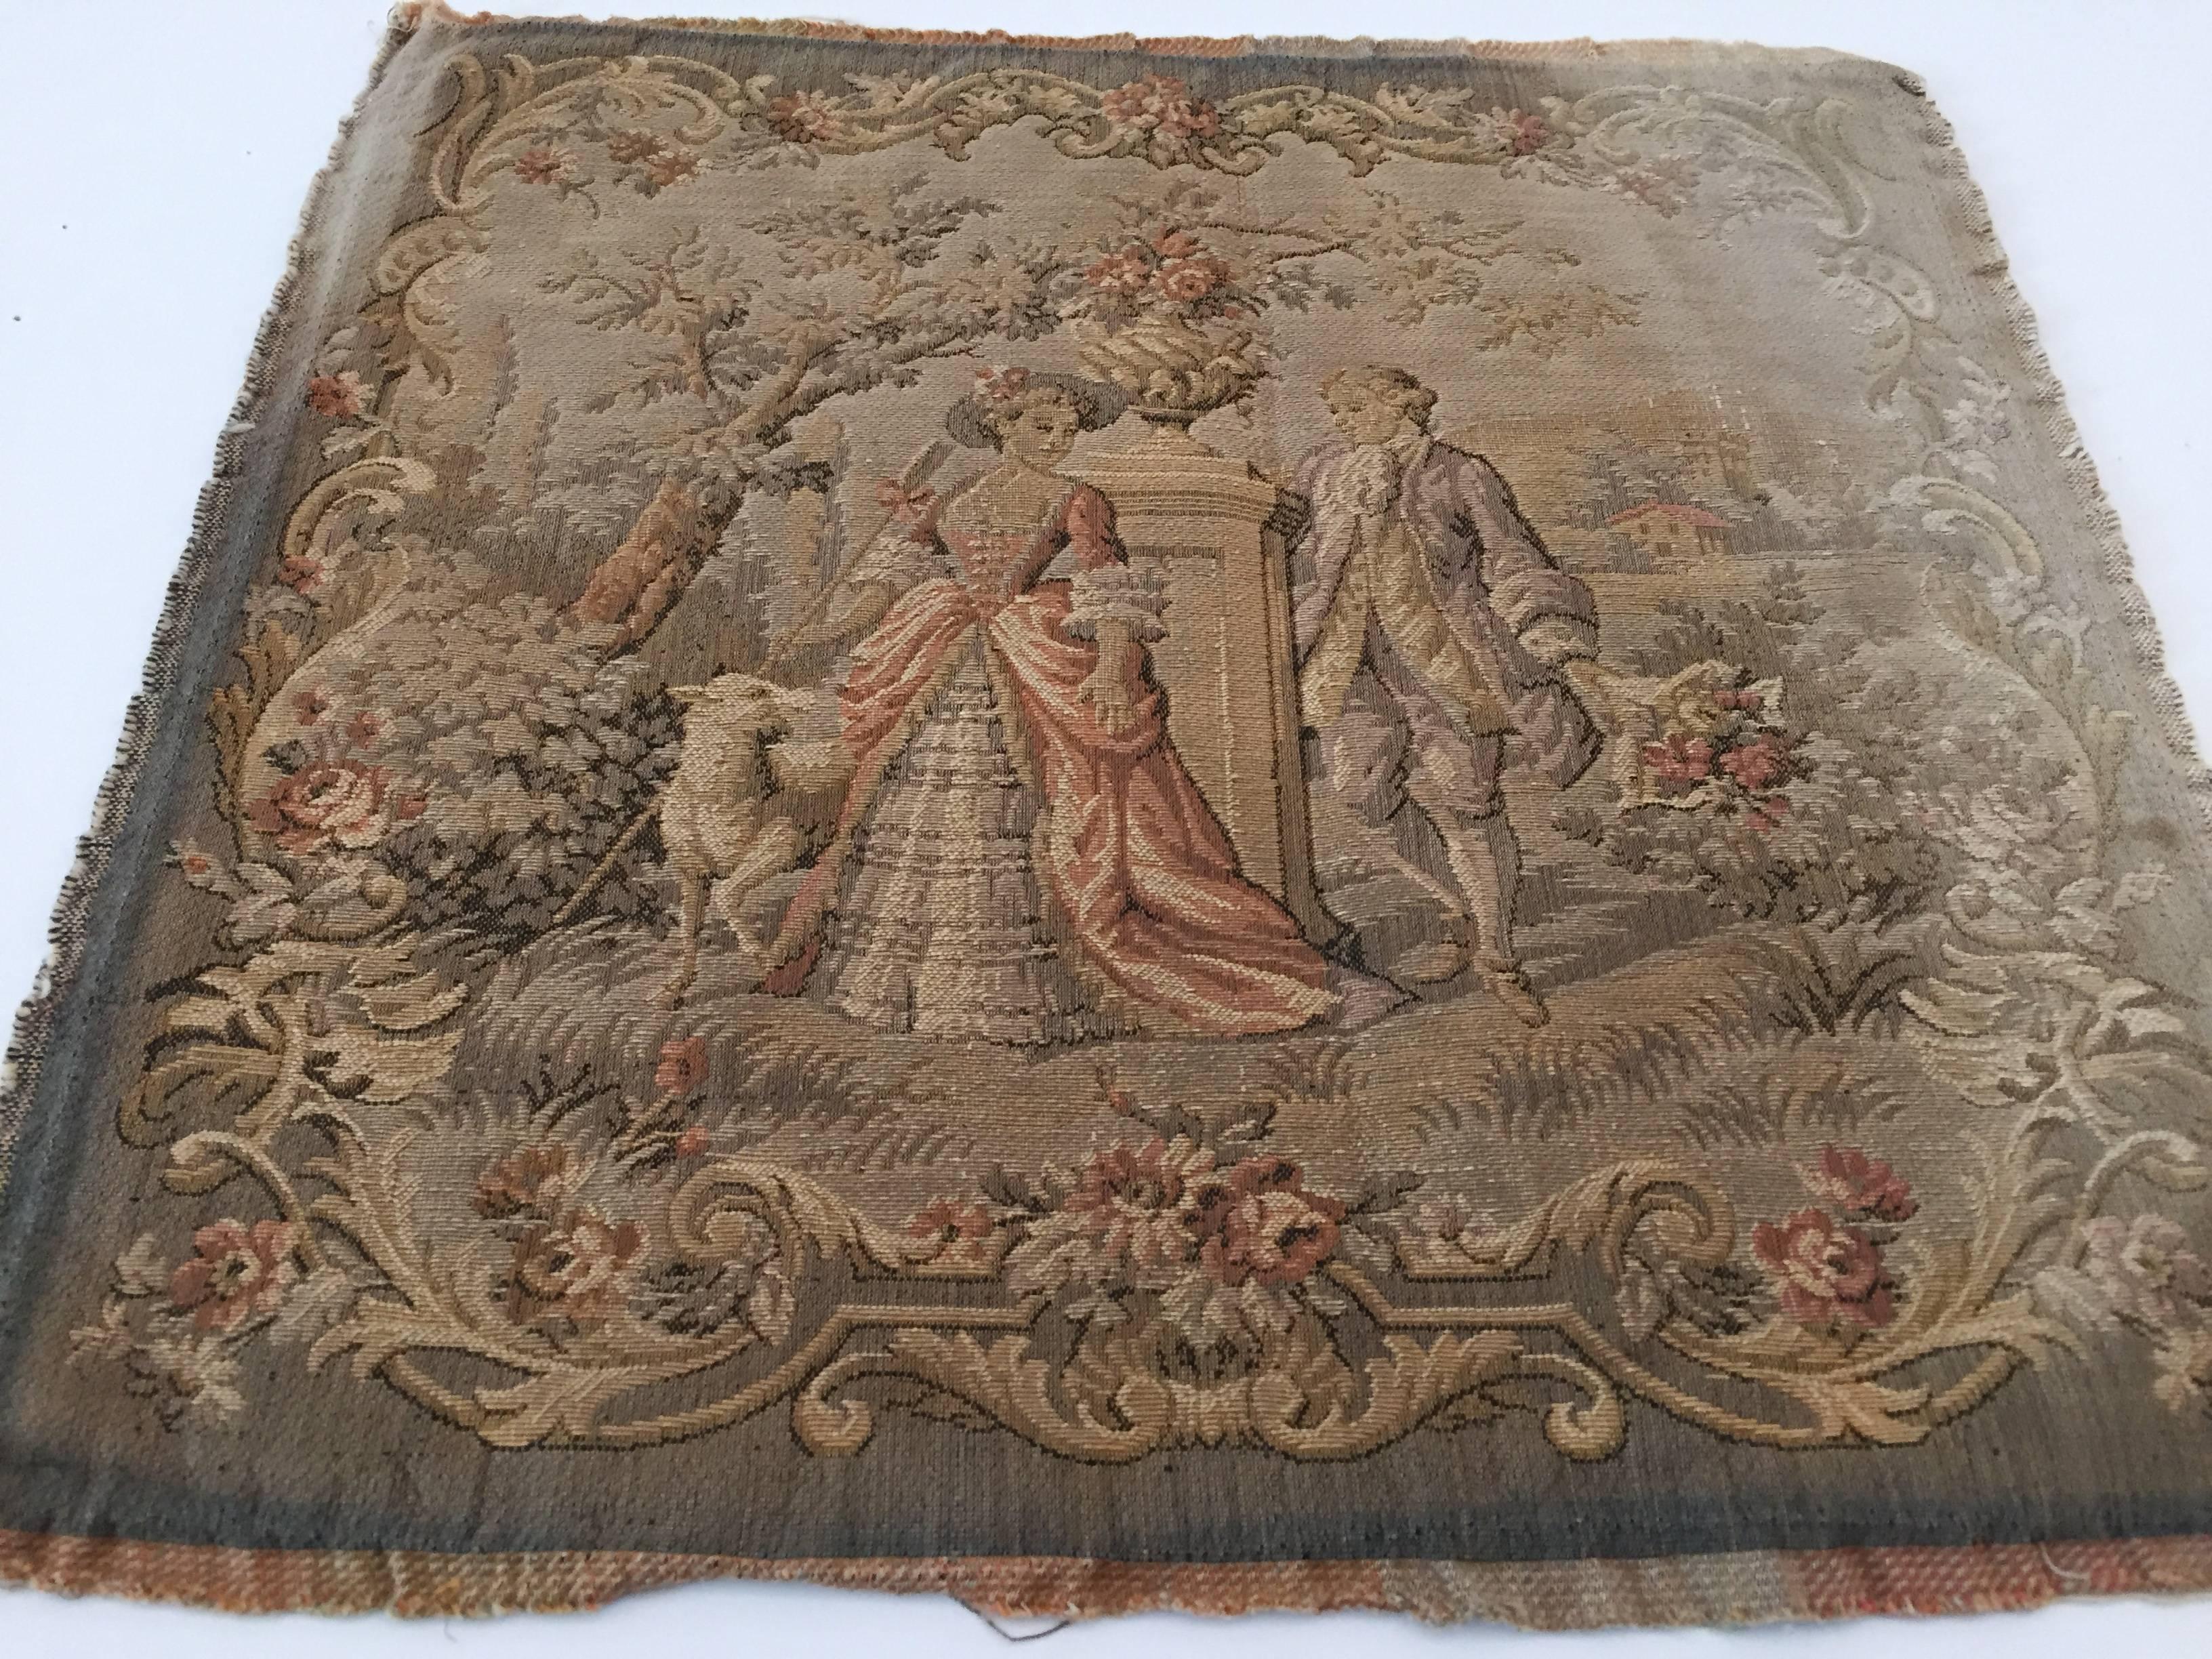 French jacquard woven wool tapestry, in the Aubusson style,
the design depicts a Royal couple with sheep in early 19th century costume in the country side with rich autumn colors, the attention to detail are exquisite.
Golden, gray and brown, pink